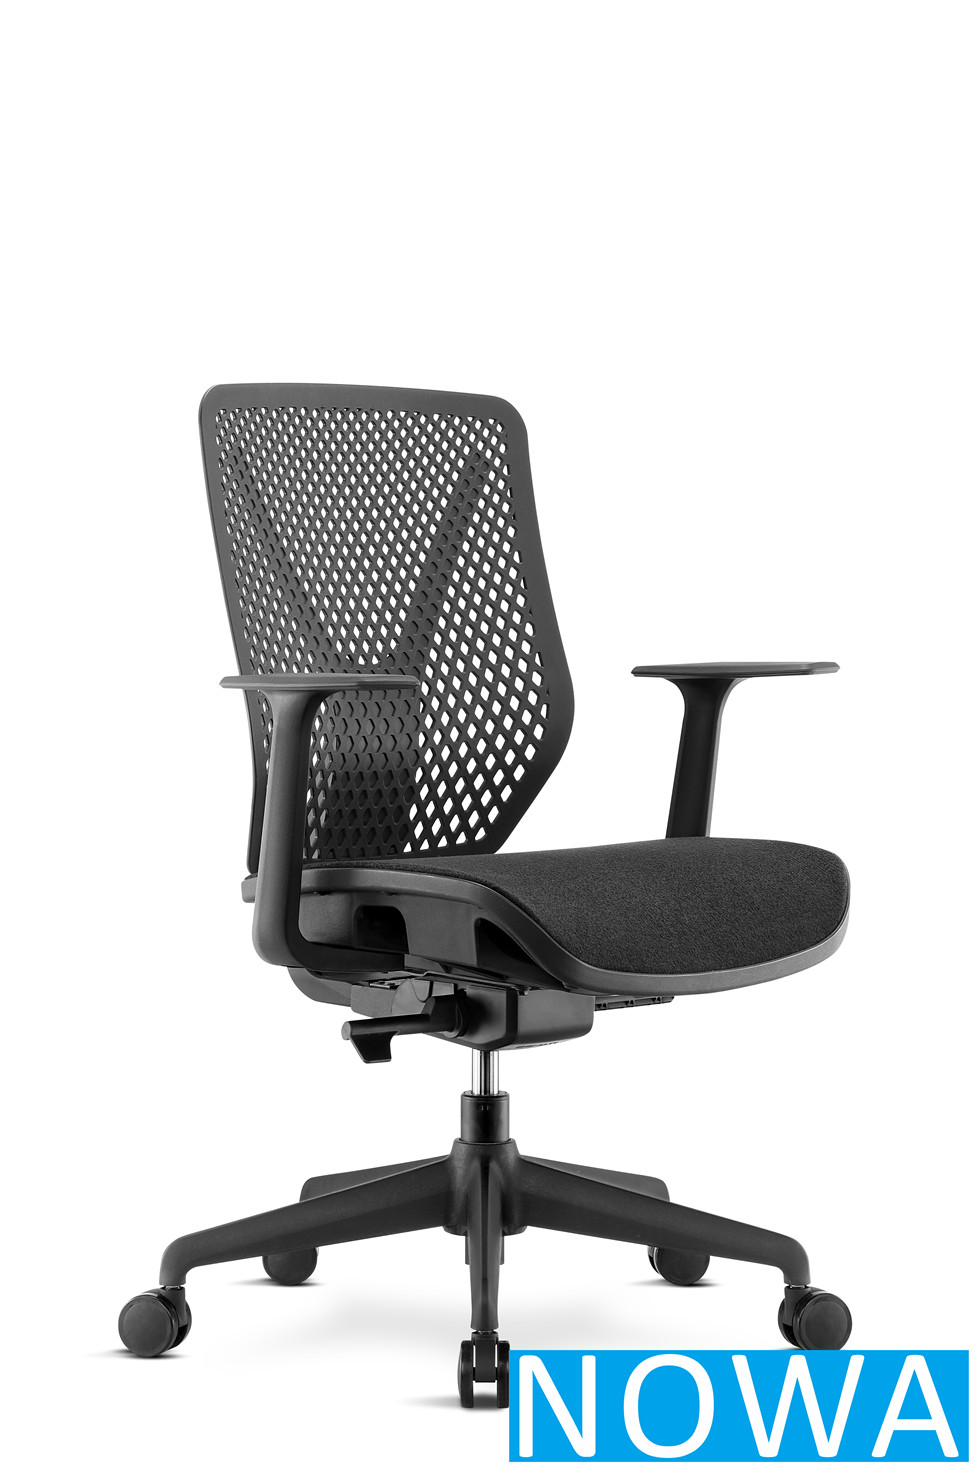 buy the office chair with mesh seat from Guangzhou factory,China supplier-NOWA-China Office Furniture, China Custom Made Furniture,